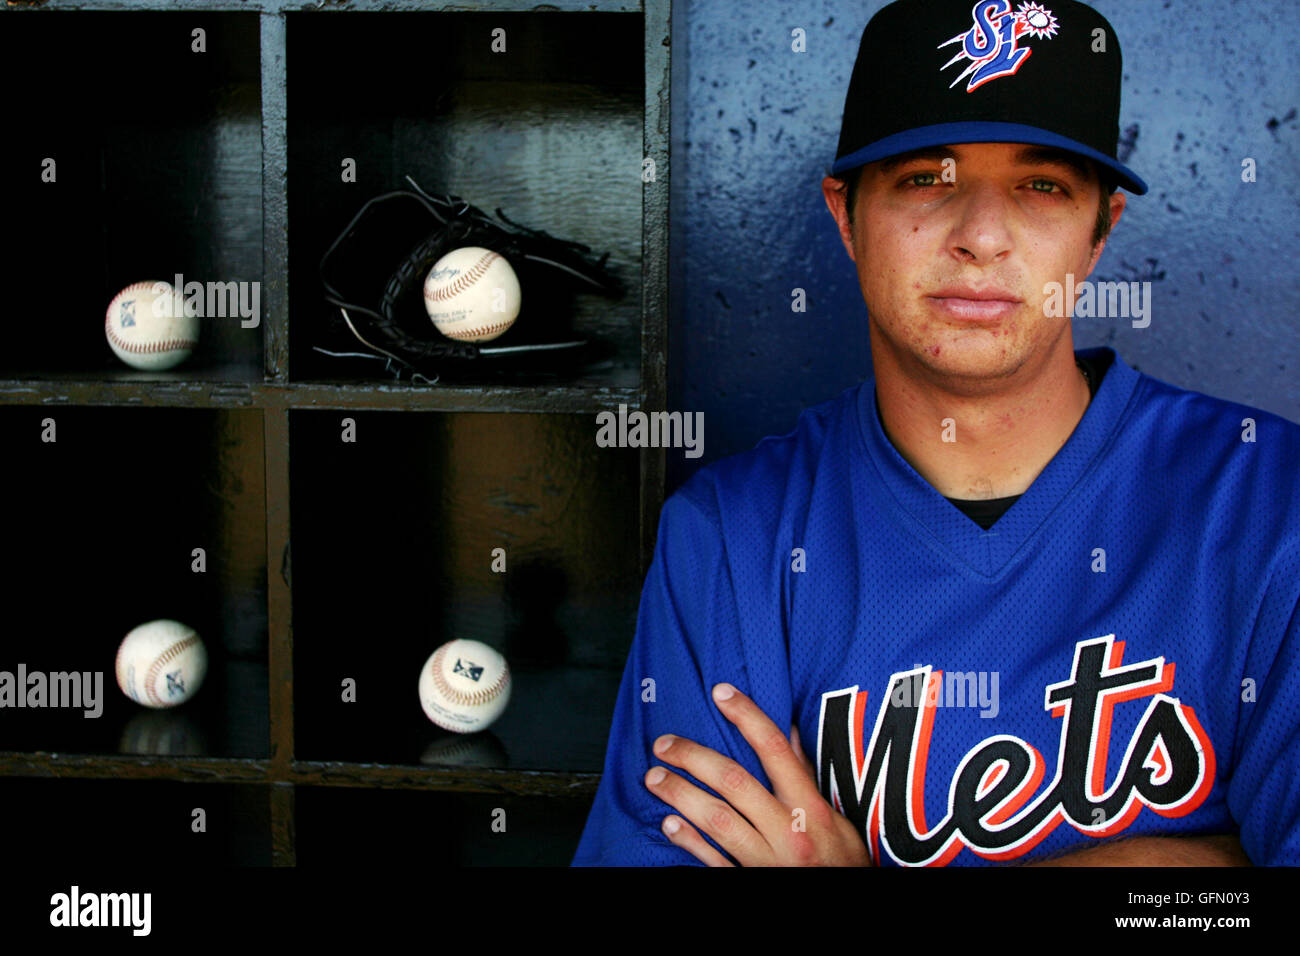 August 1, 2016 - Florida, U.S. - 040208 tc spt mets-- (3 of 5)--0051113A- Staff Photos by Amanda Voisard/The Palm Beach Post----for tc spt story by Chuck King ---  Port St. Lucie-- St. Lucie Mets player Brant Rustich at in the St. Lucie Mets dugout at Tradition Field on Wednesday-- 04/02/08 NOT FOR DISTRIBUTION OUTSIDE COX PAPERS. OUT PALM BEACH, BROWARD, MARTIN, ST. LUCIE, INDIAN RIVER AND OKEECHOBEE COUNTIES IN FLORIDA. OUT ORLANDO. OUT TV. OUT MAGAZINES. OUT TABLOIDS. OUT WIDE WORLD. OUT INTERNET USE. NO SALES. (Credit Image: © Amanda Voisard/The Palm Beach Post via ZUMA Wire) Stock Photo